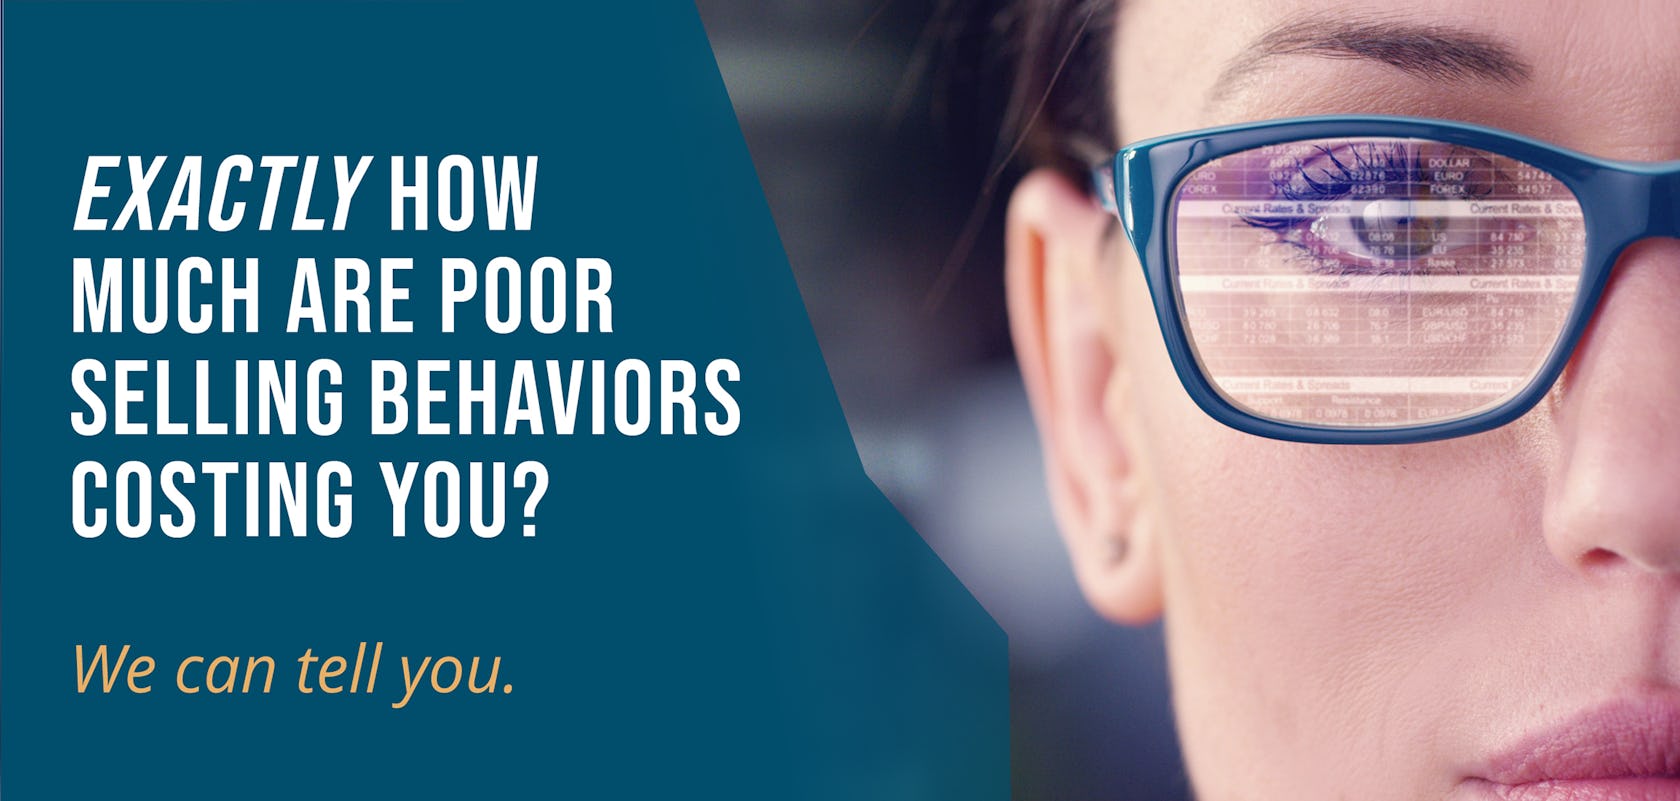 introductory banner to the richardson sales training company home page that says "Exactly How Much Are Poor Selling Behaviors Costing You? We can tell you."